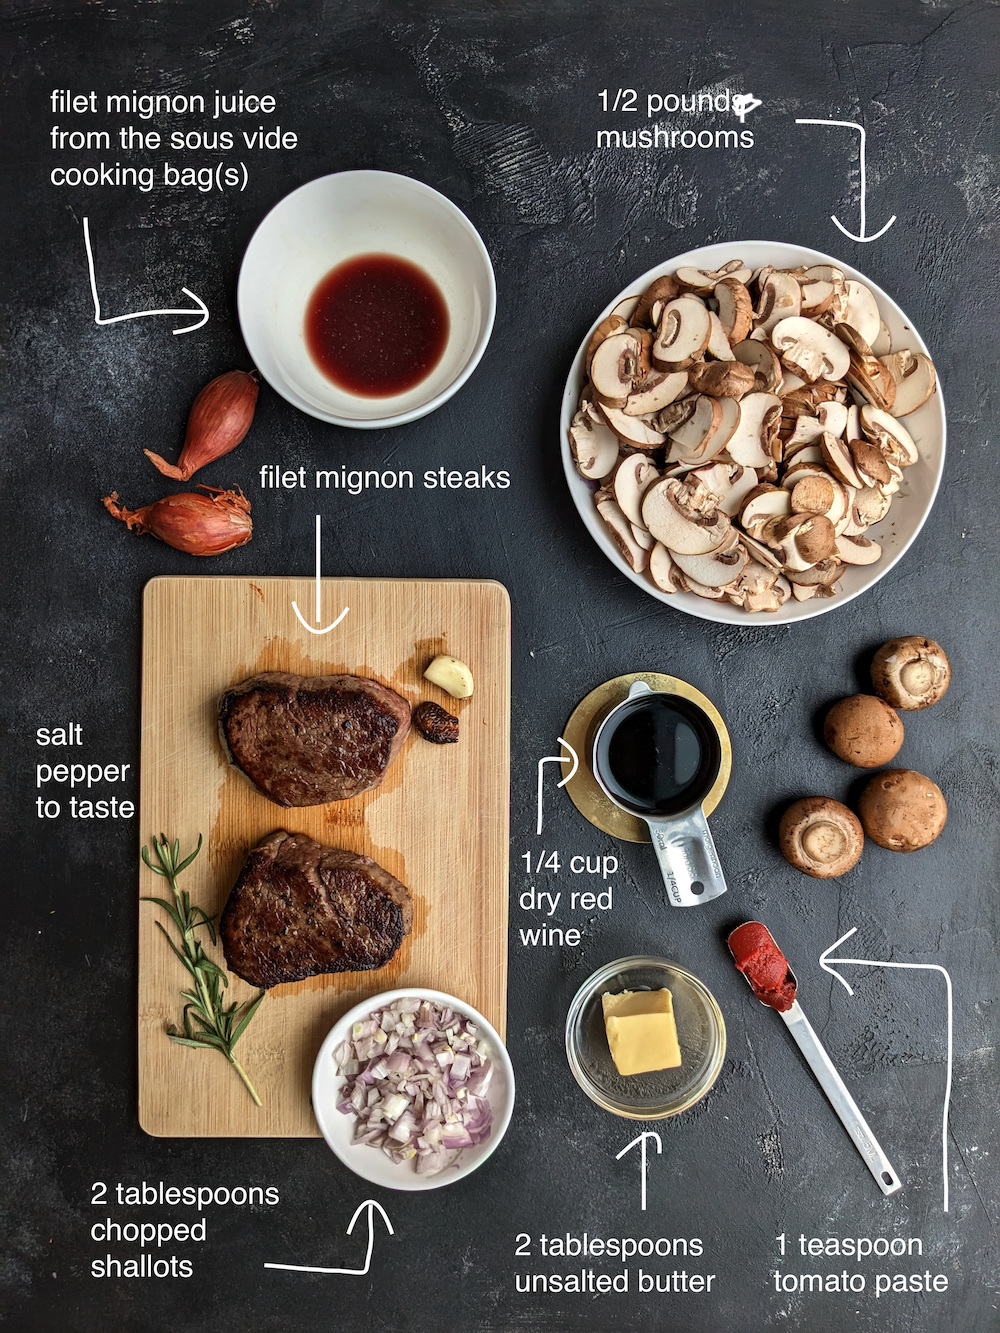 Ingredients for sous vide filet mignon with mushroom sauce